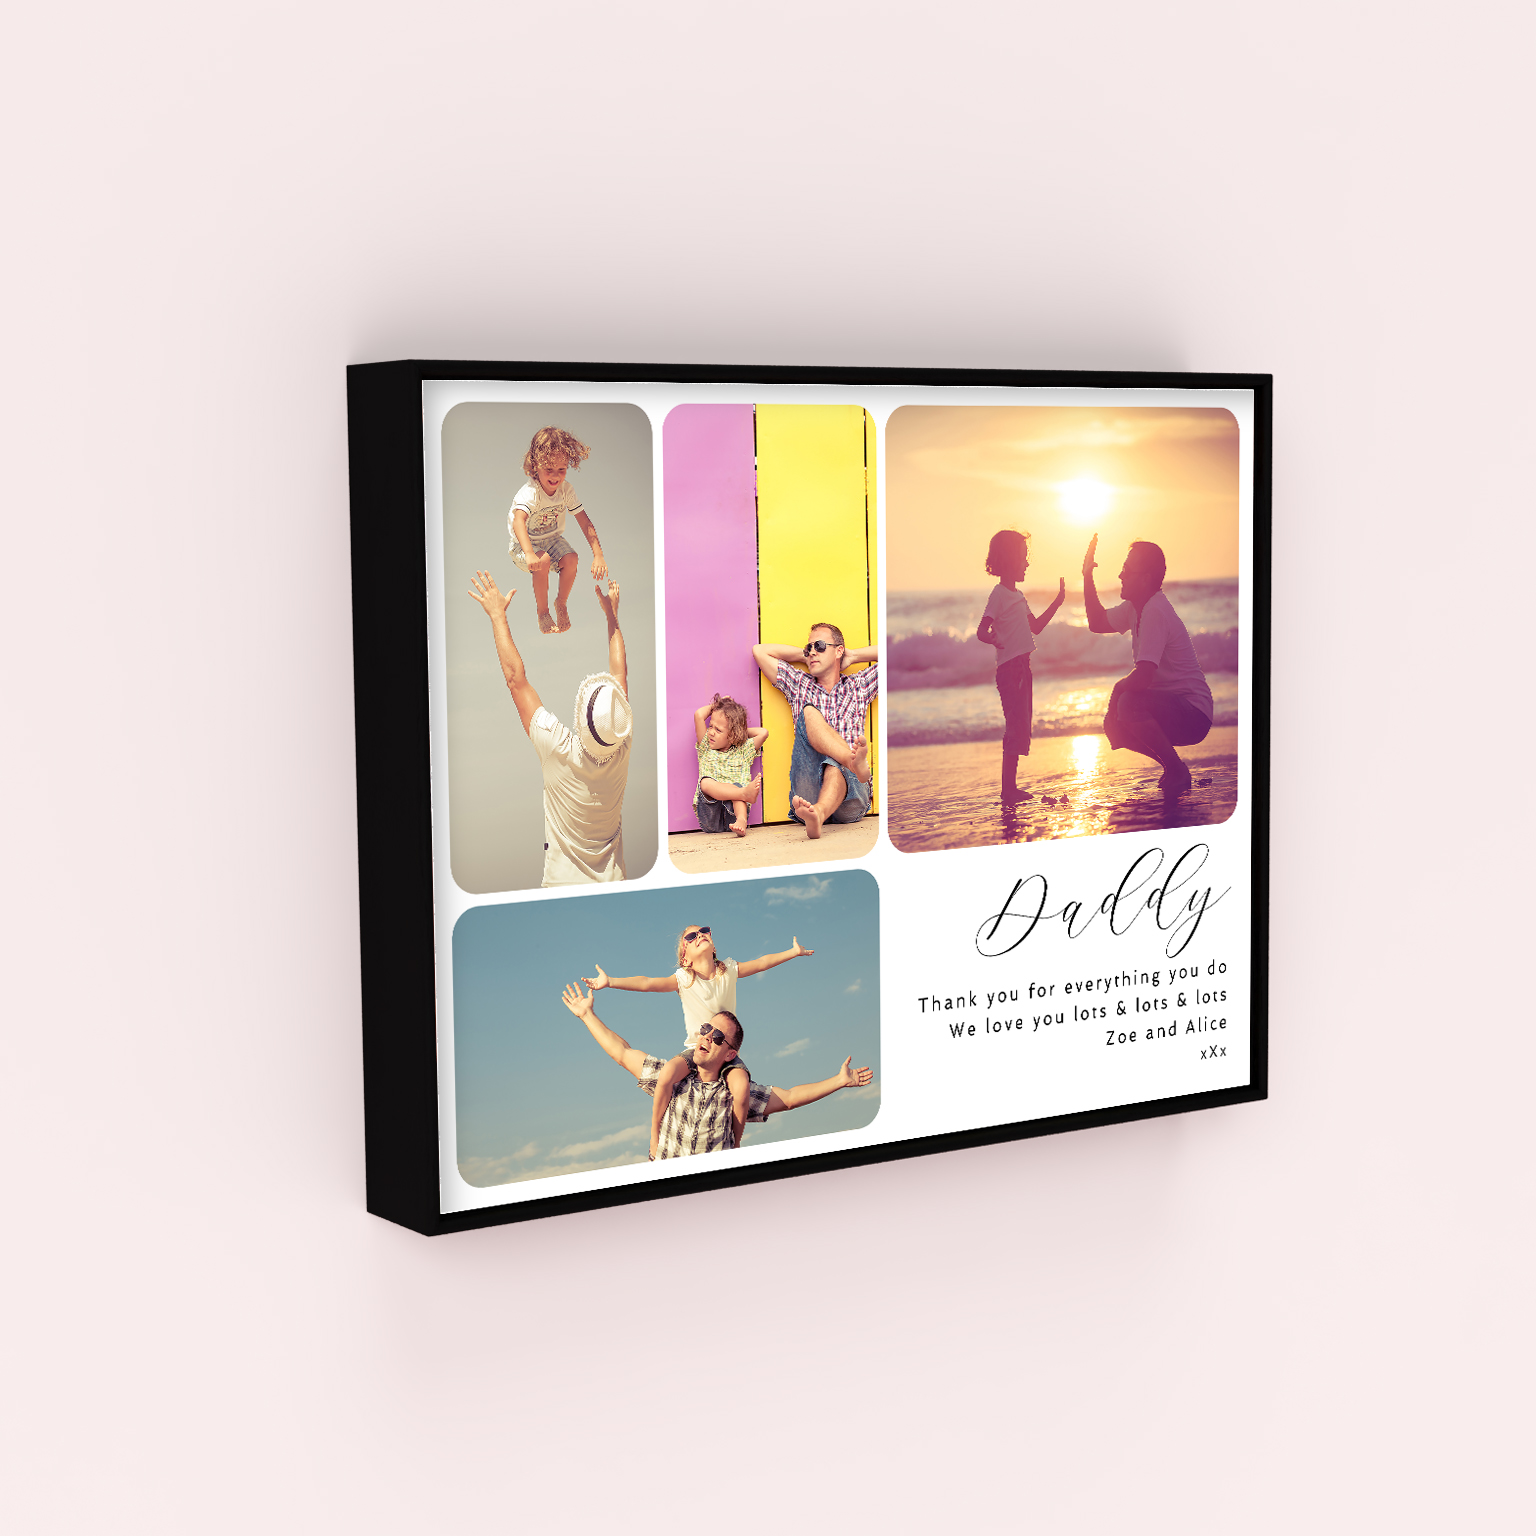 Dad's Collage Boxed Photo Prints - A Heartfelt Gift Capturing Family Bonds with 4 Photos